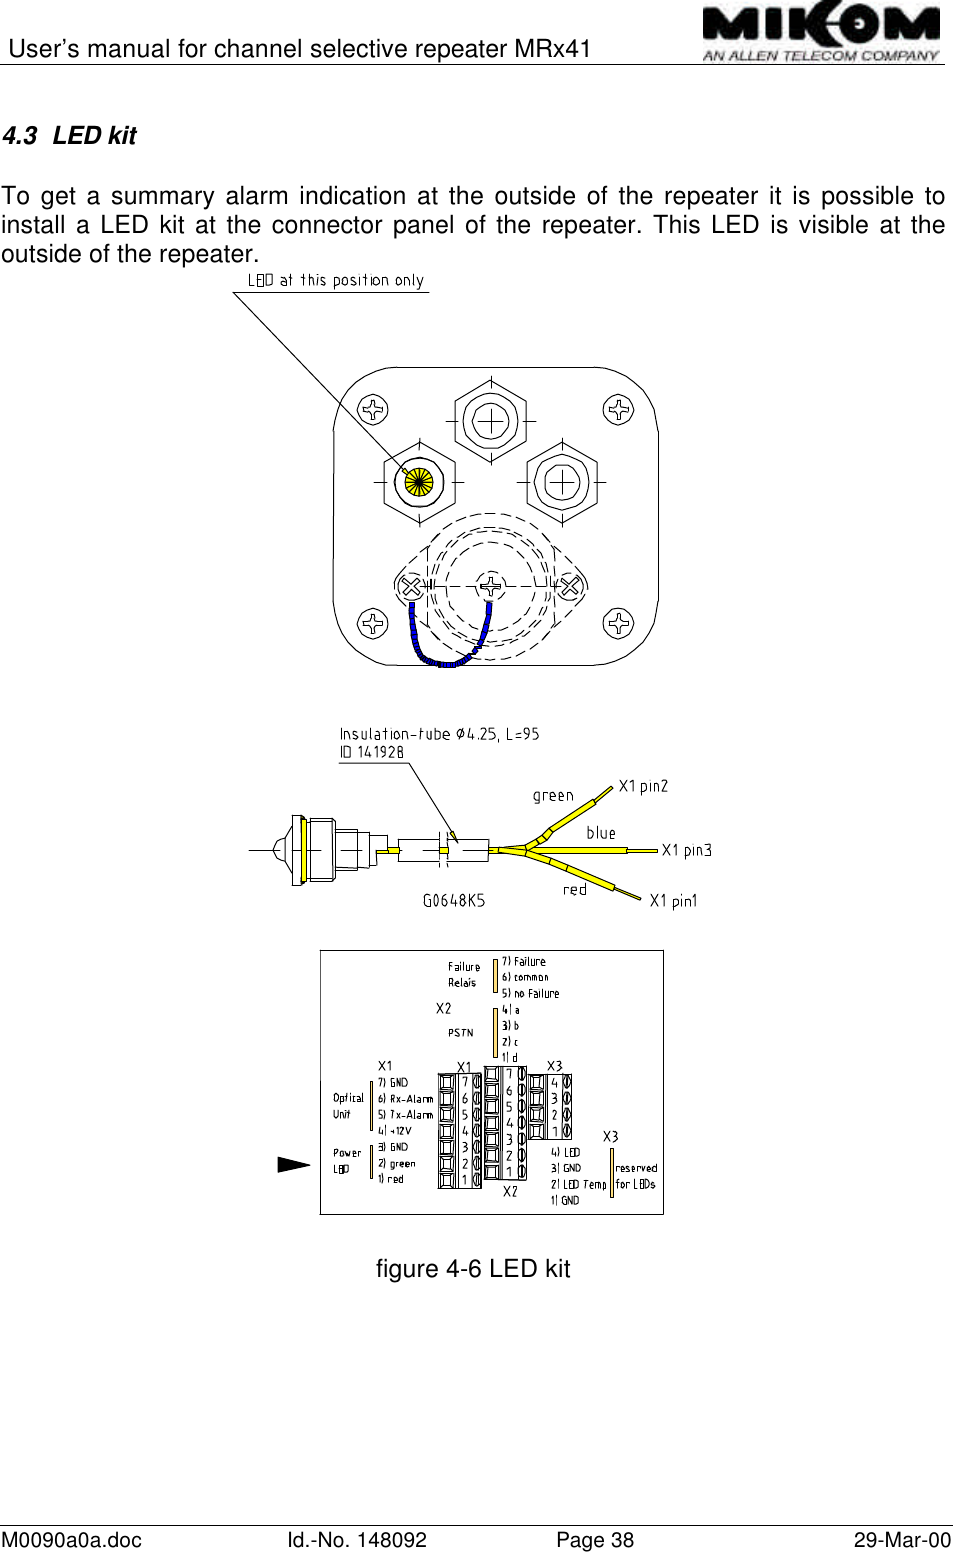 User’s manual for channel selective repeater MRx41M0090a0a.doc Id.-No. 148092 Page 38 29-Mar-004.3 LED kitTo get a summary alarm indication at the outside of the repeater it is possible toinstall a LED kit at the connector panel of the repeater. This LED is visible at theoutside of the repeater.figure 4-6 LED kit